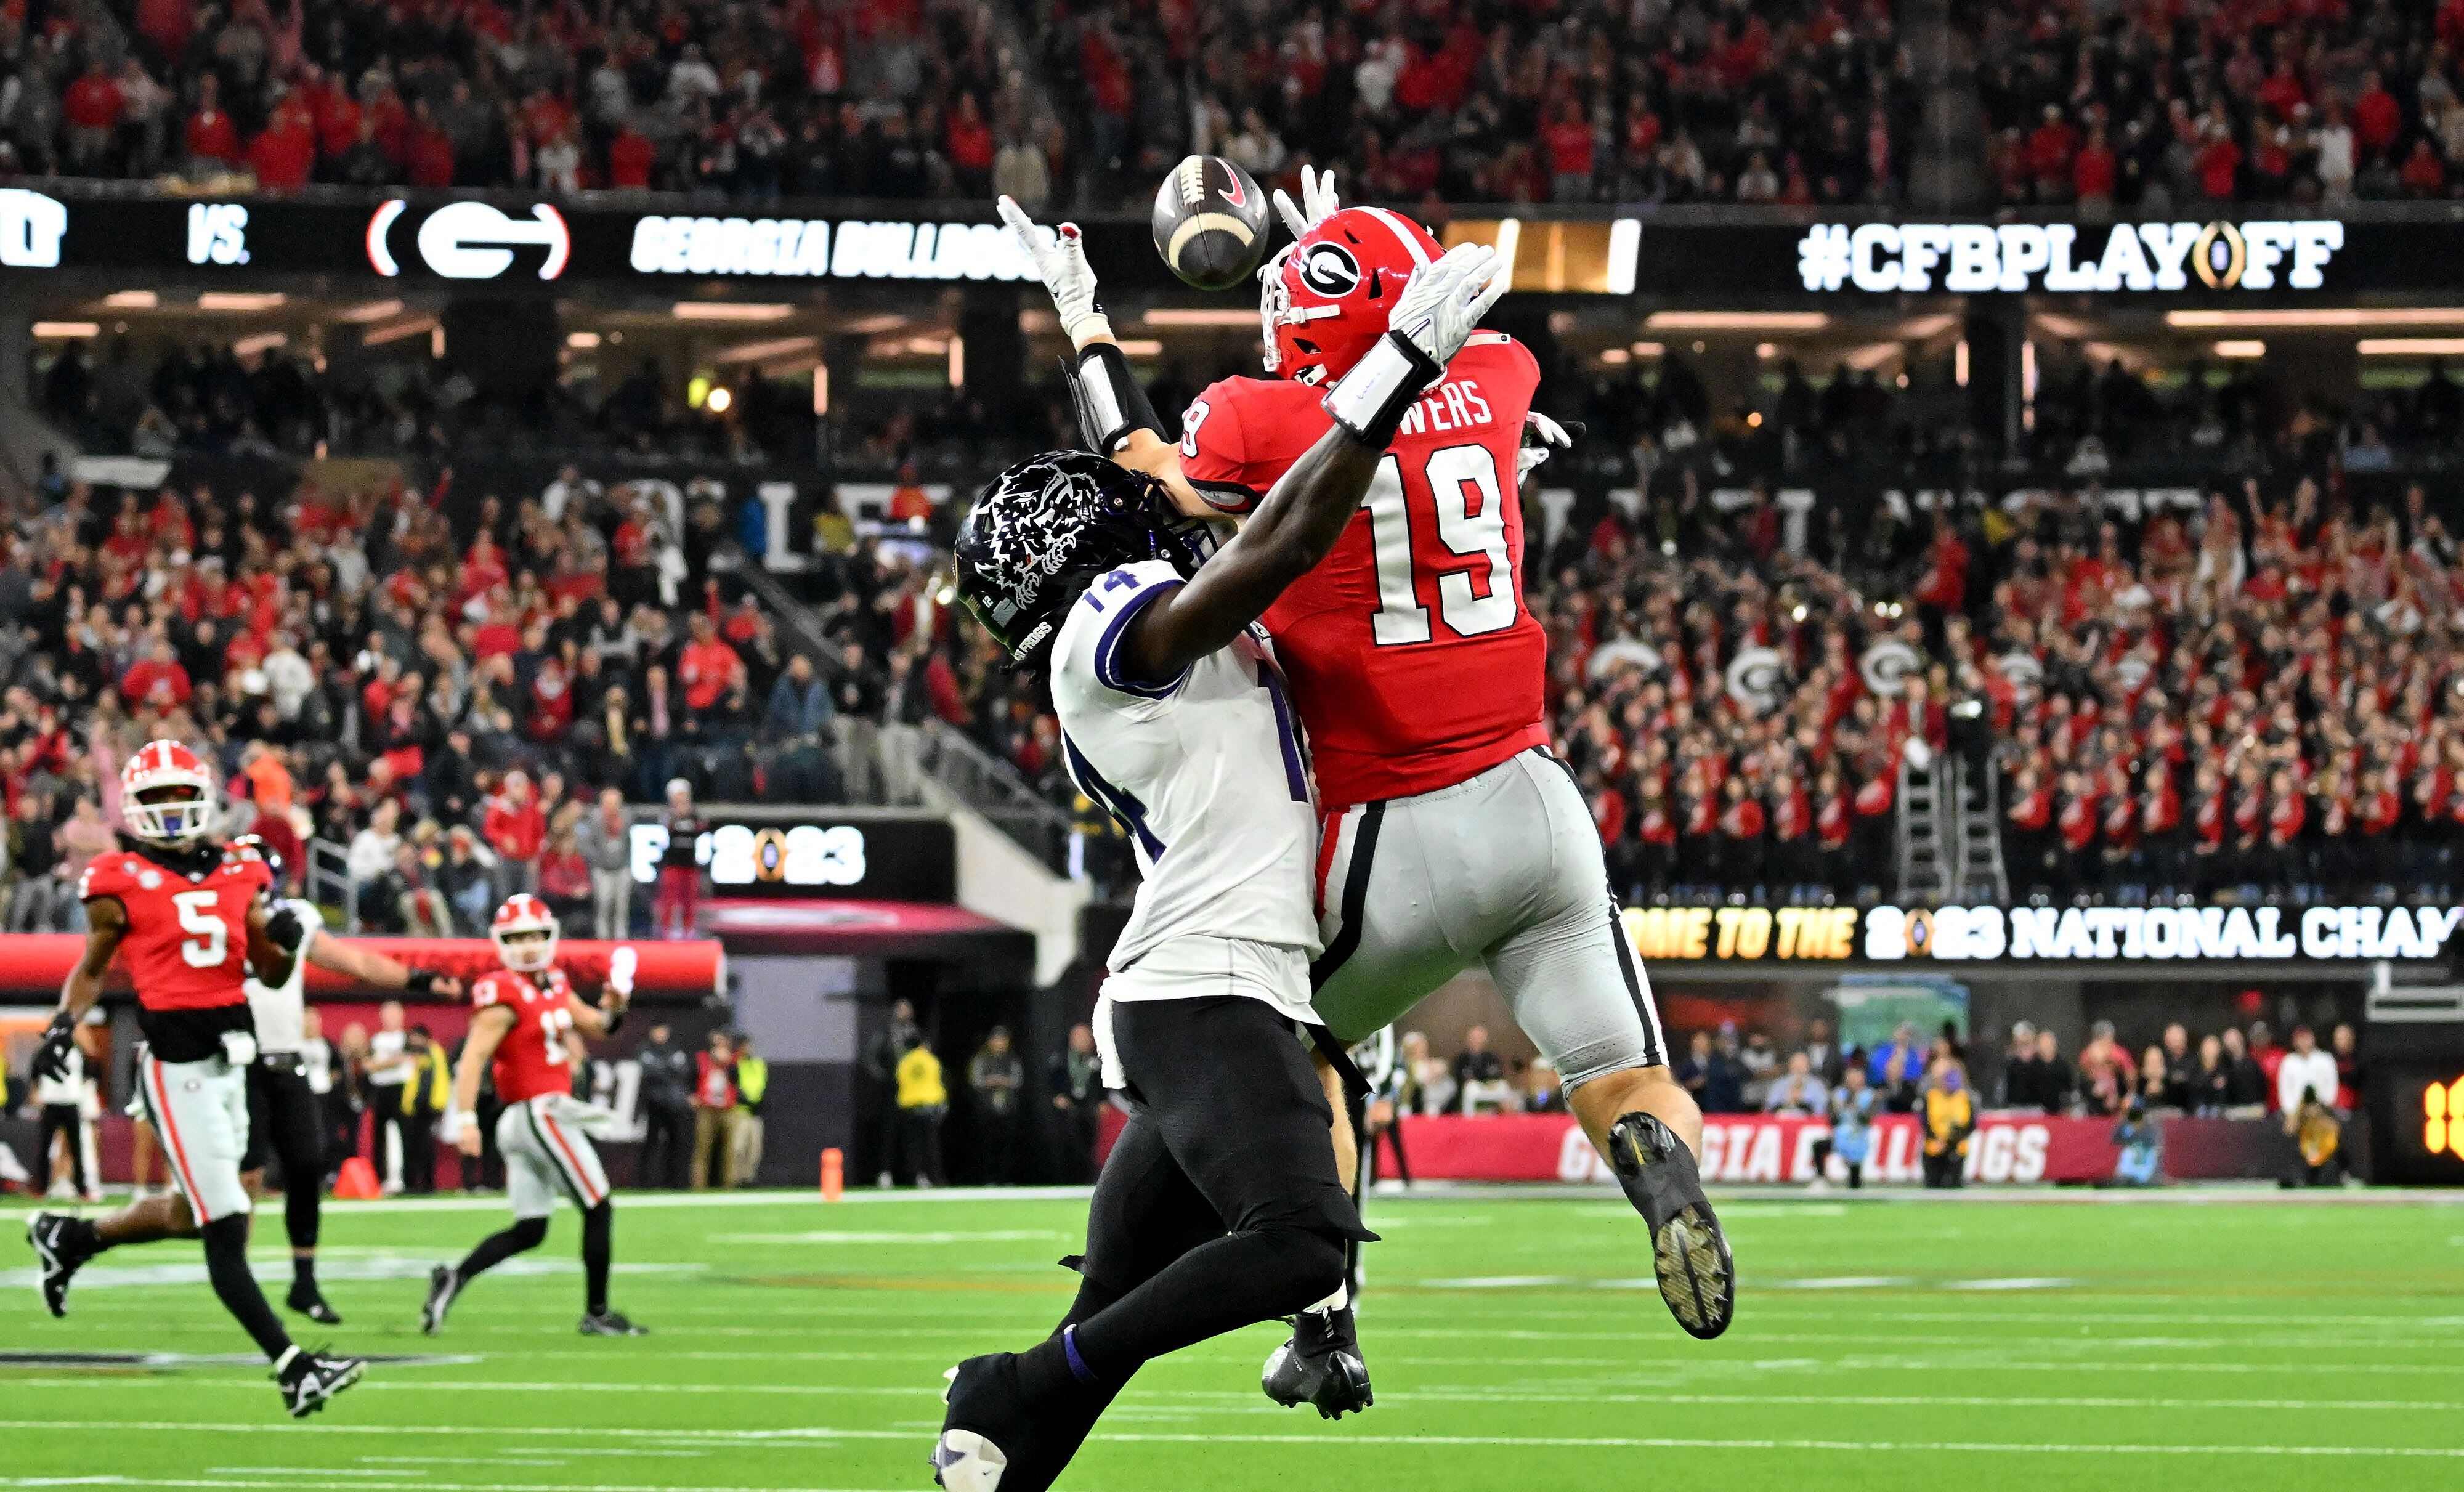 Georgia's Quay Walker selected 22nd overall by the Green Bay Packers in the NFL  draft, Georgia Sports